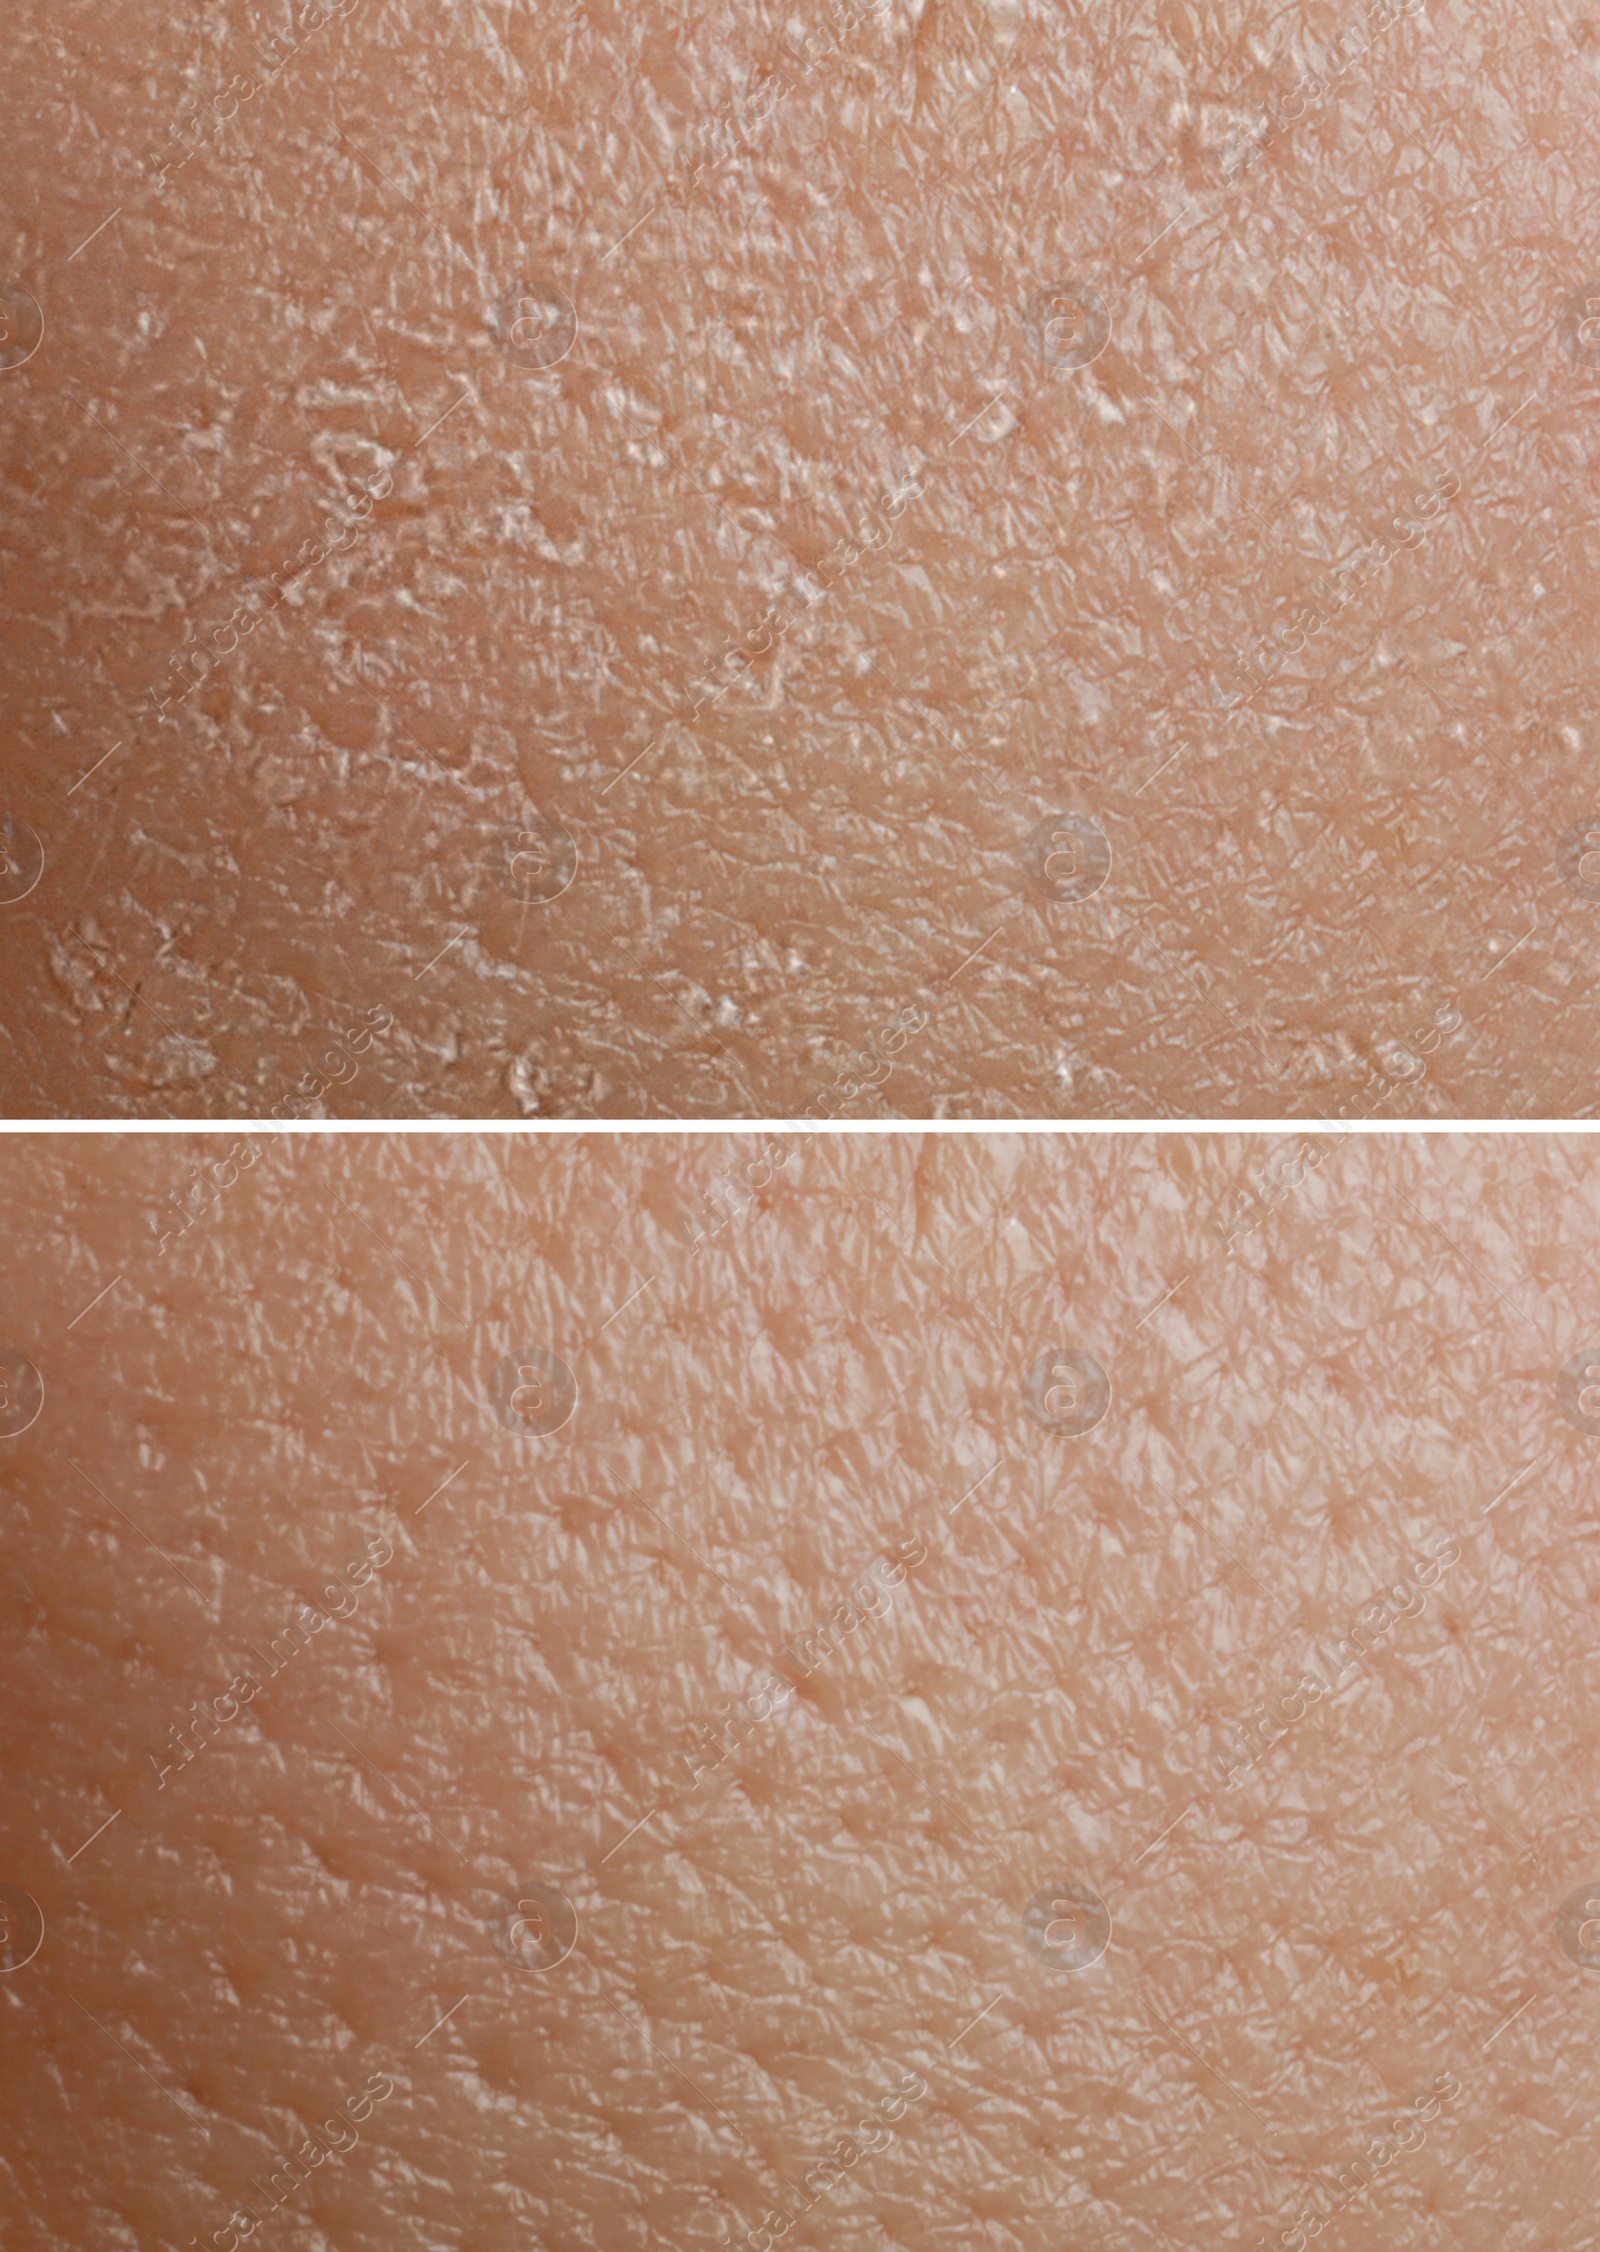 Image of Collage demonstrating comparison of dry and moisturized human skin, closeup